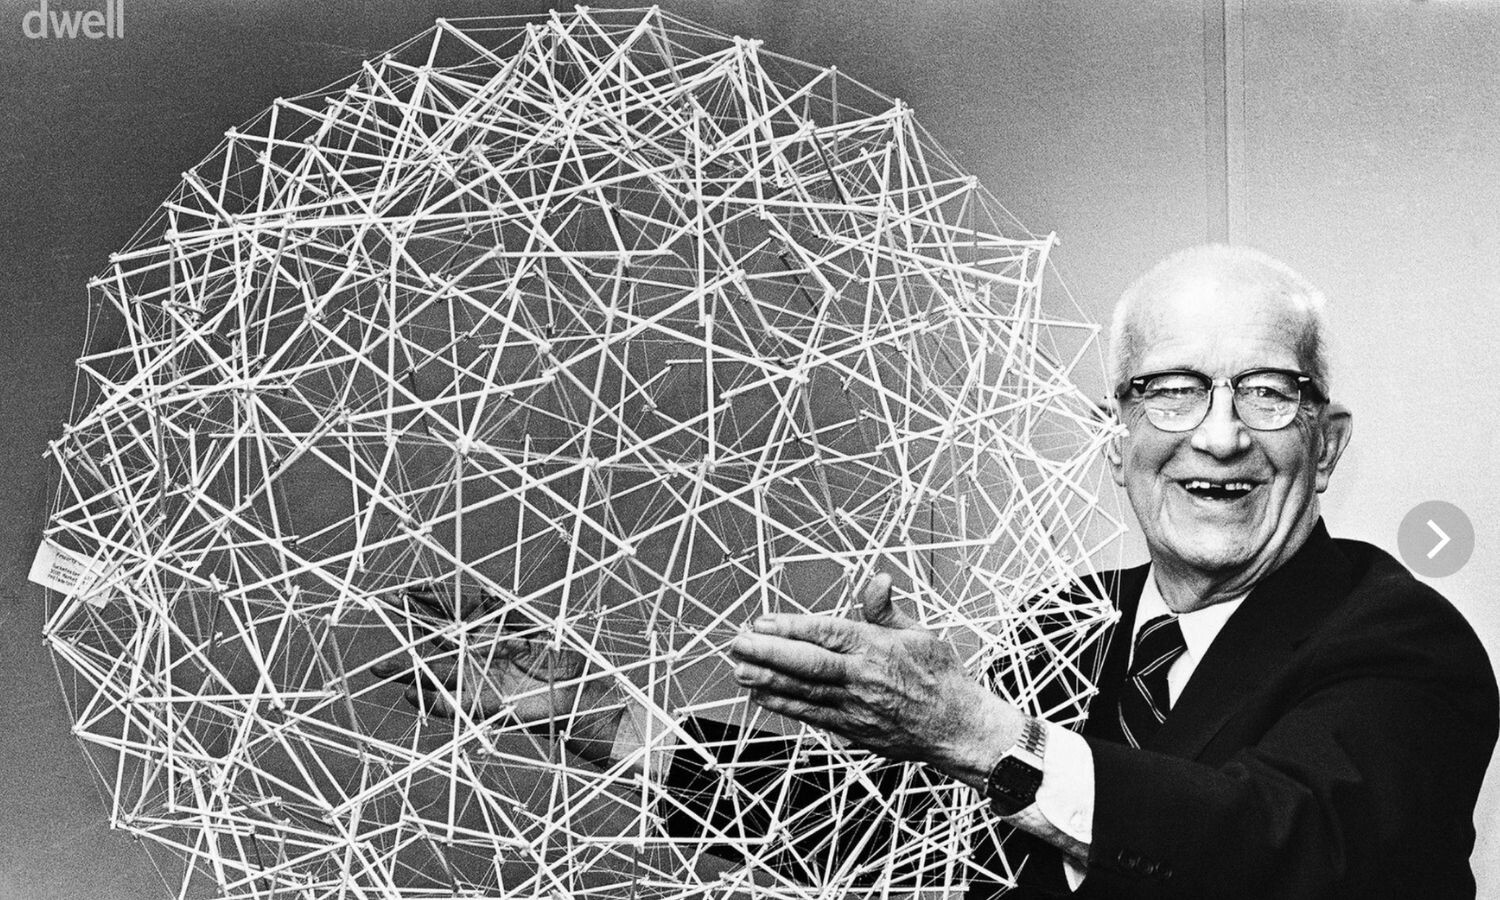 Buckminster Fuller smiling and holding a sphere made of sticks connected by string.